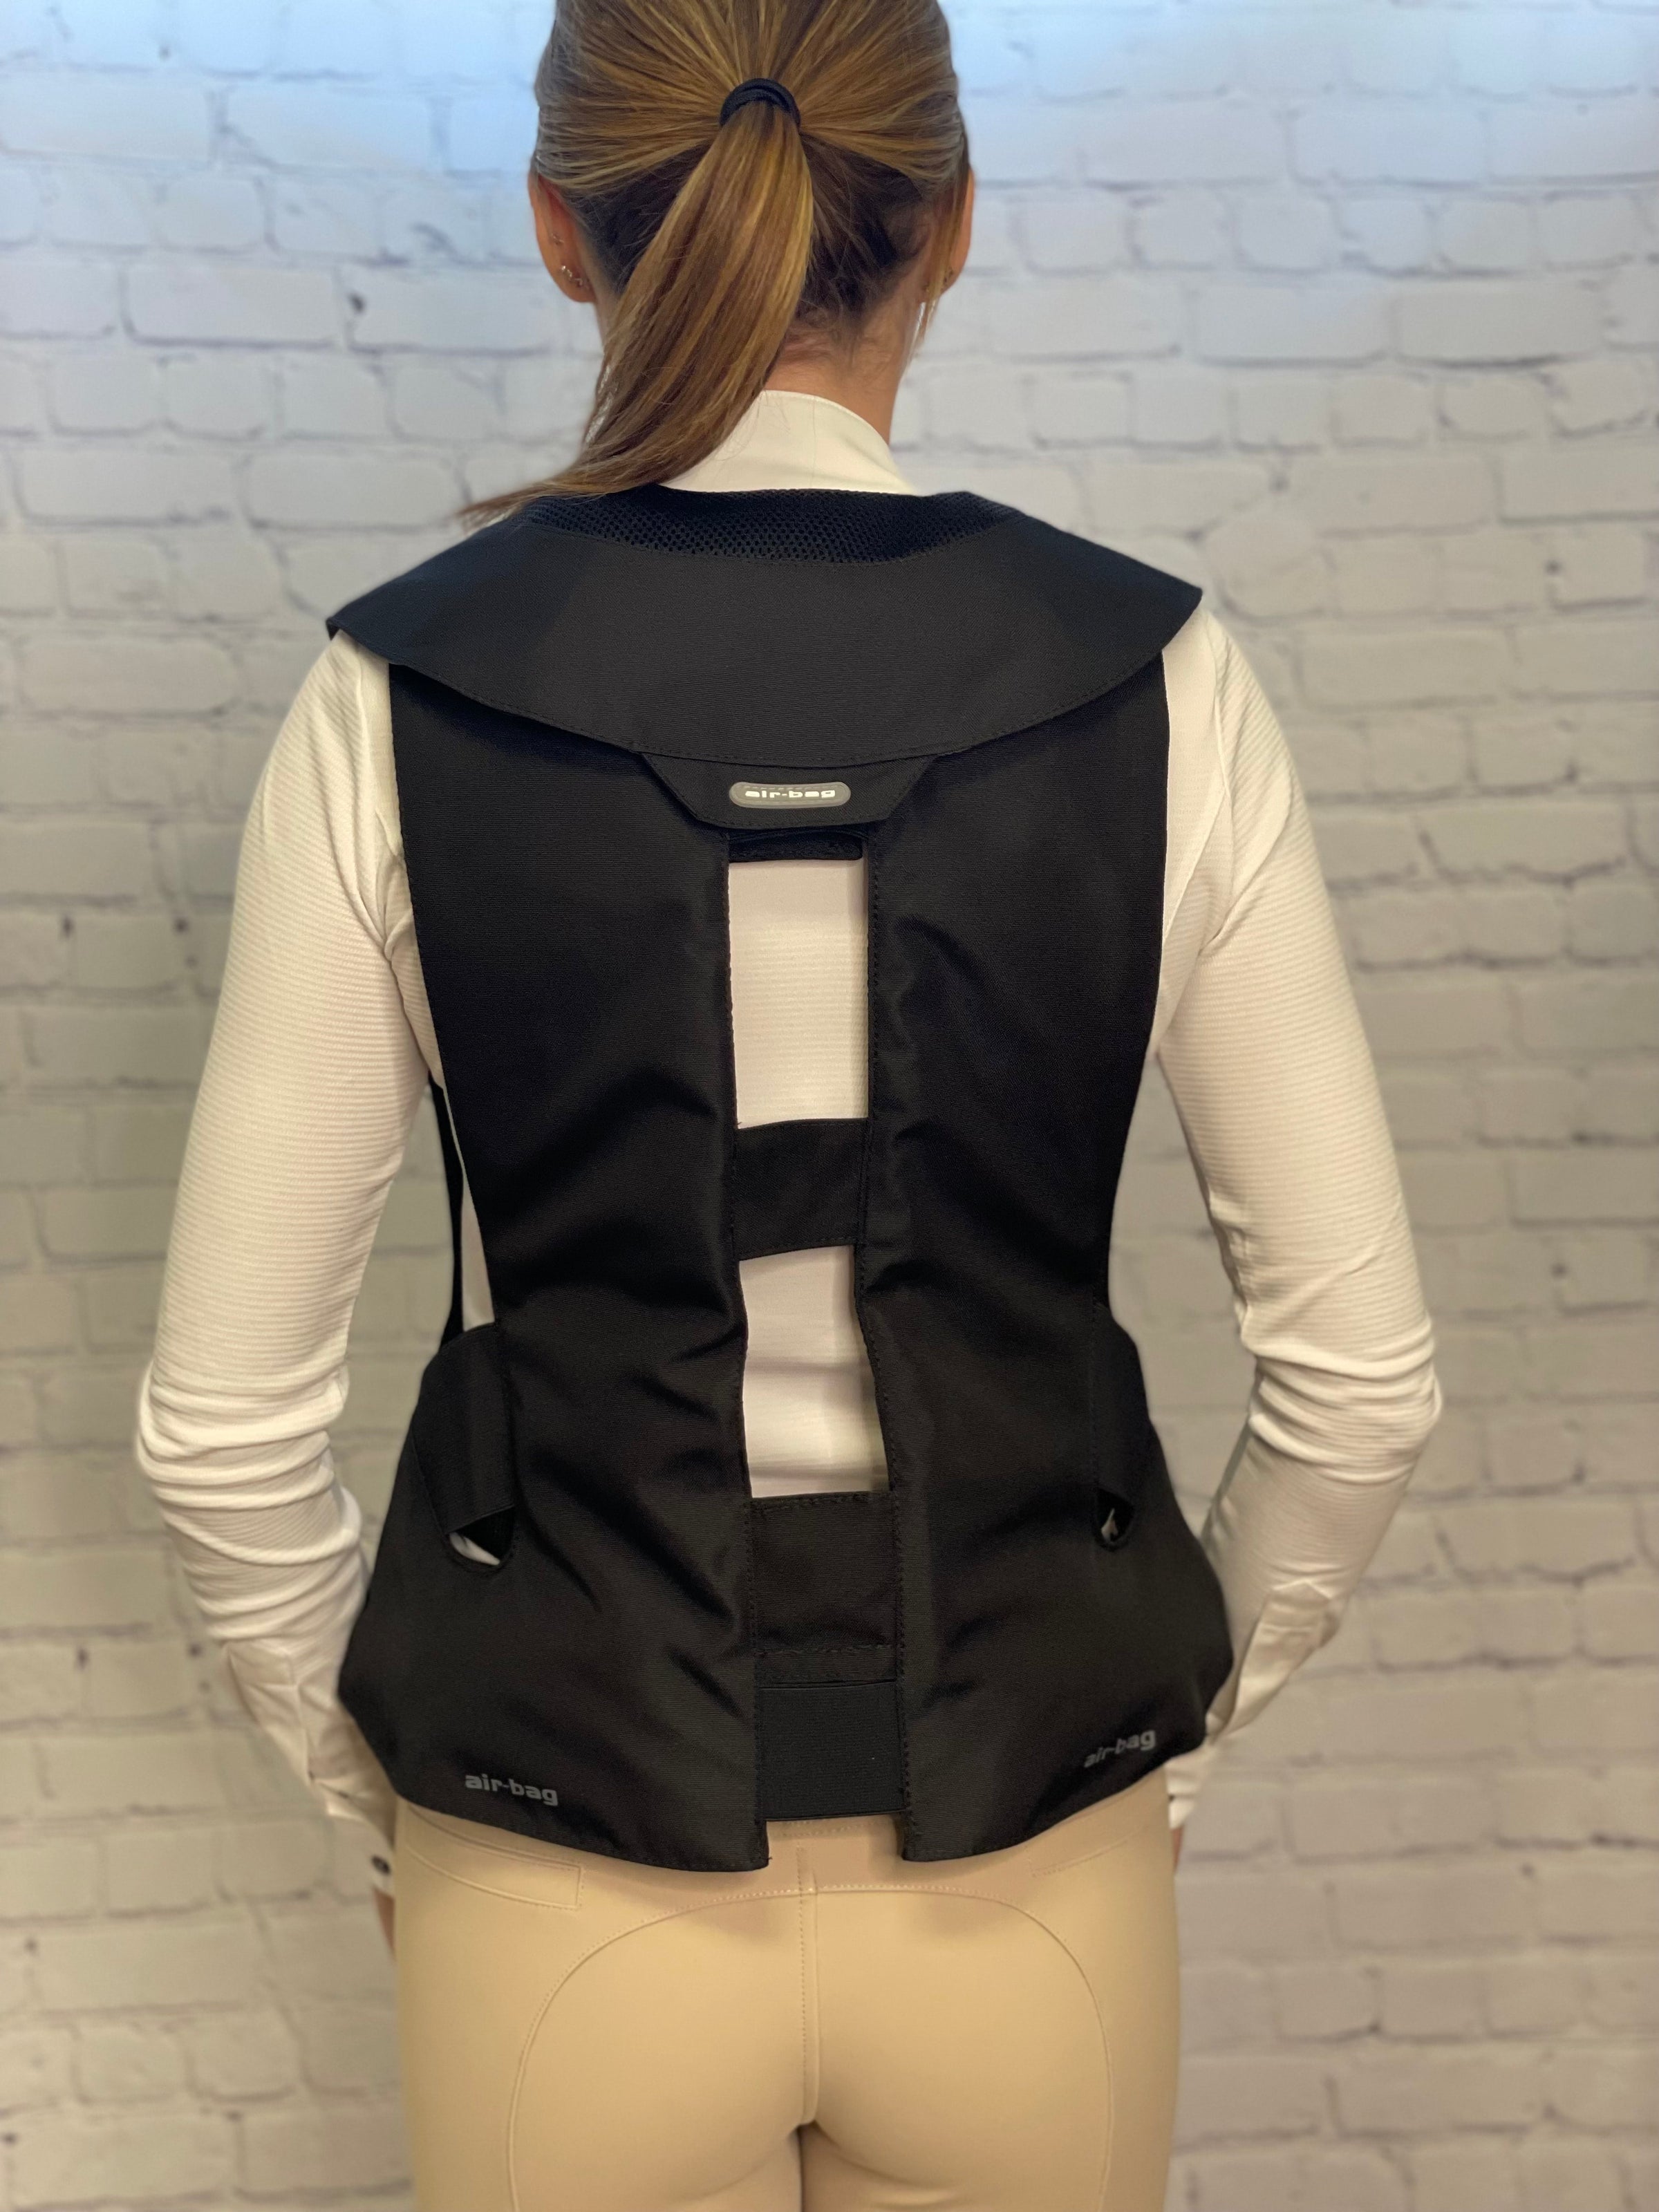 Hit-Air Airbag Vest Light Weight (LV)